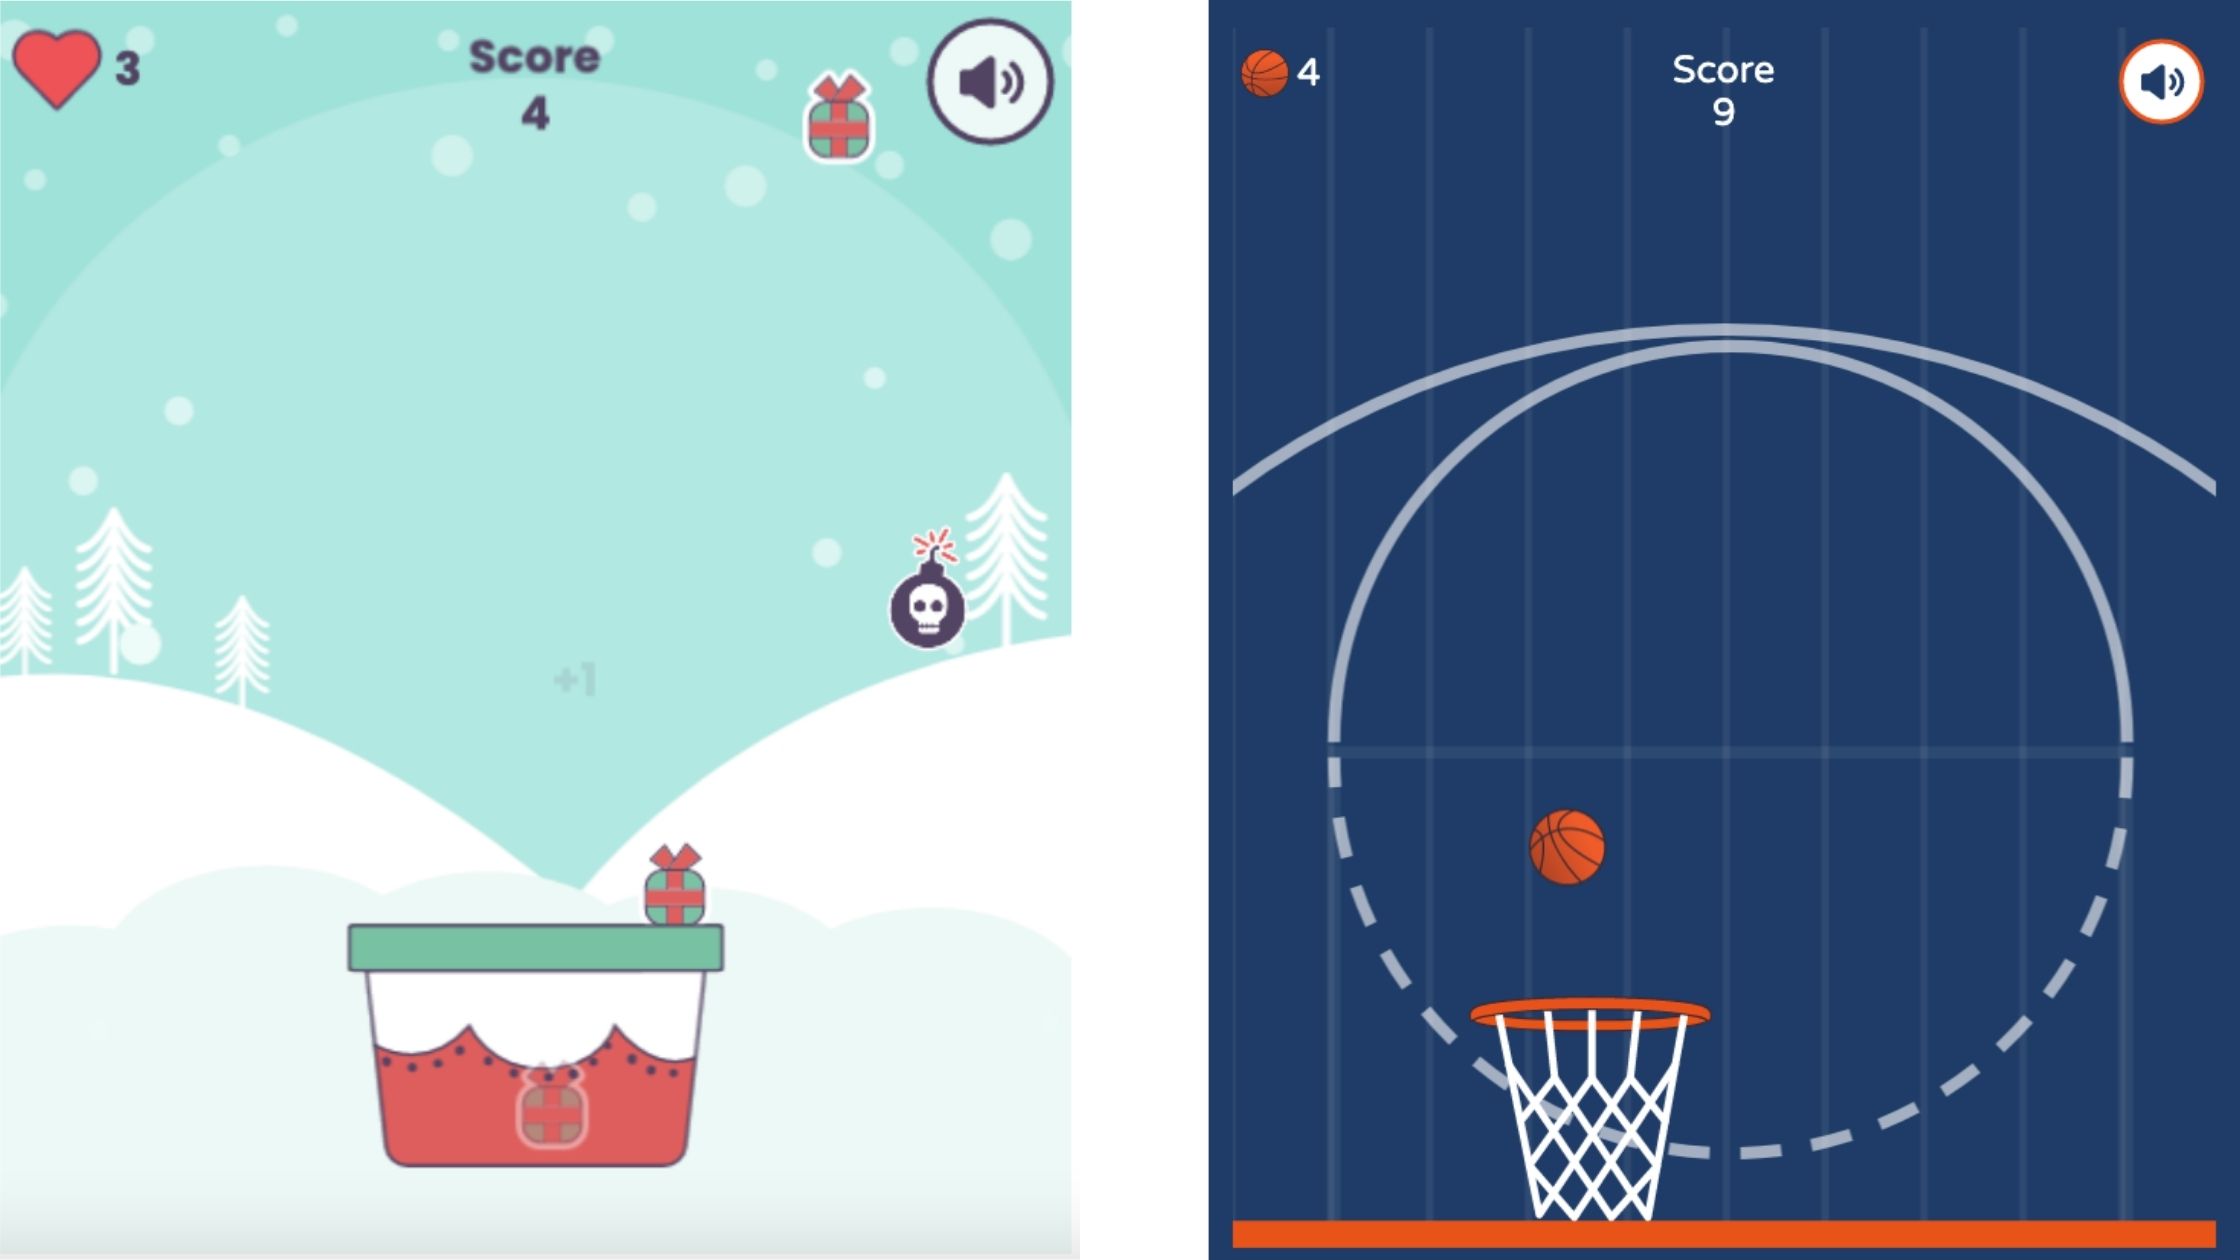 In the catcher game, participants must catch Christmas gifts or basketballs